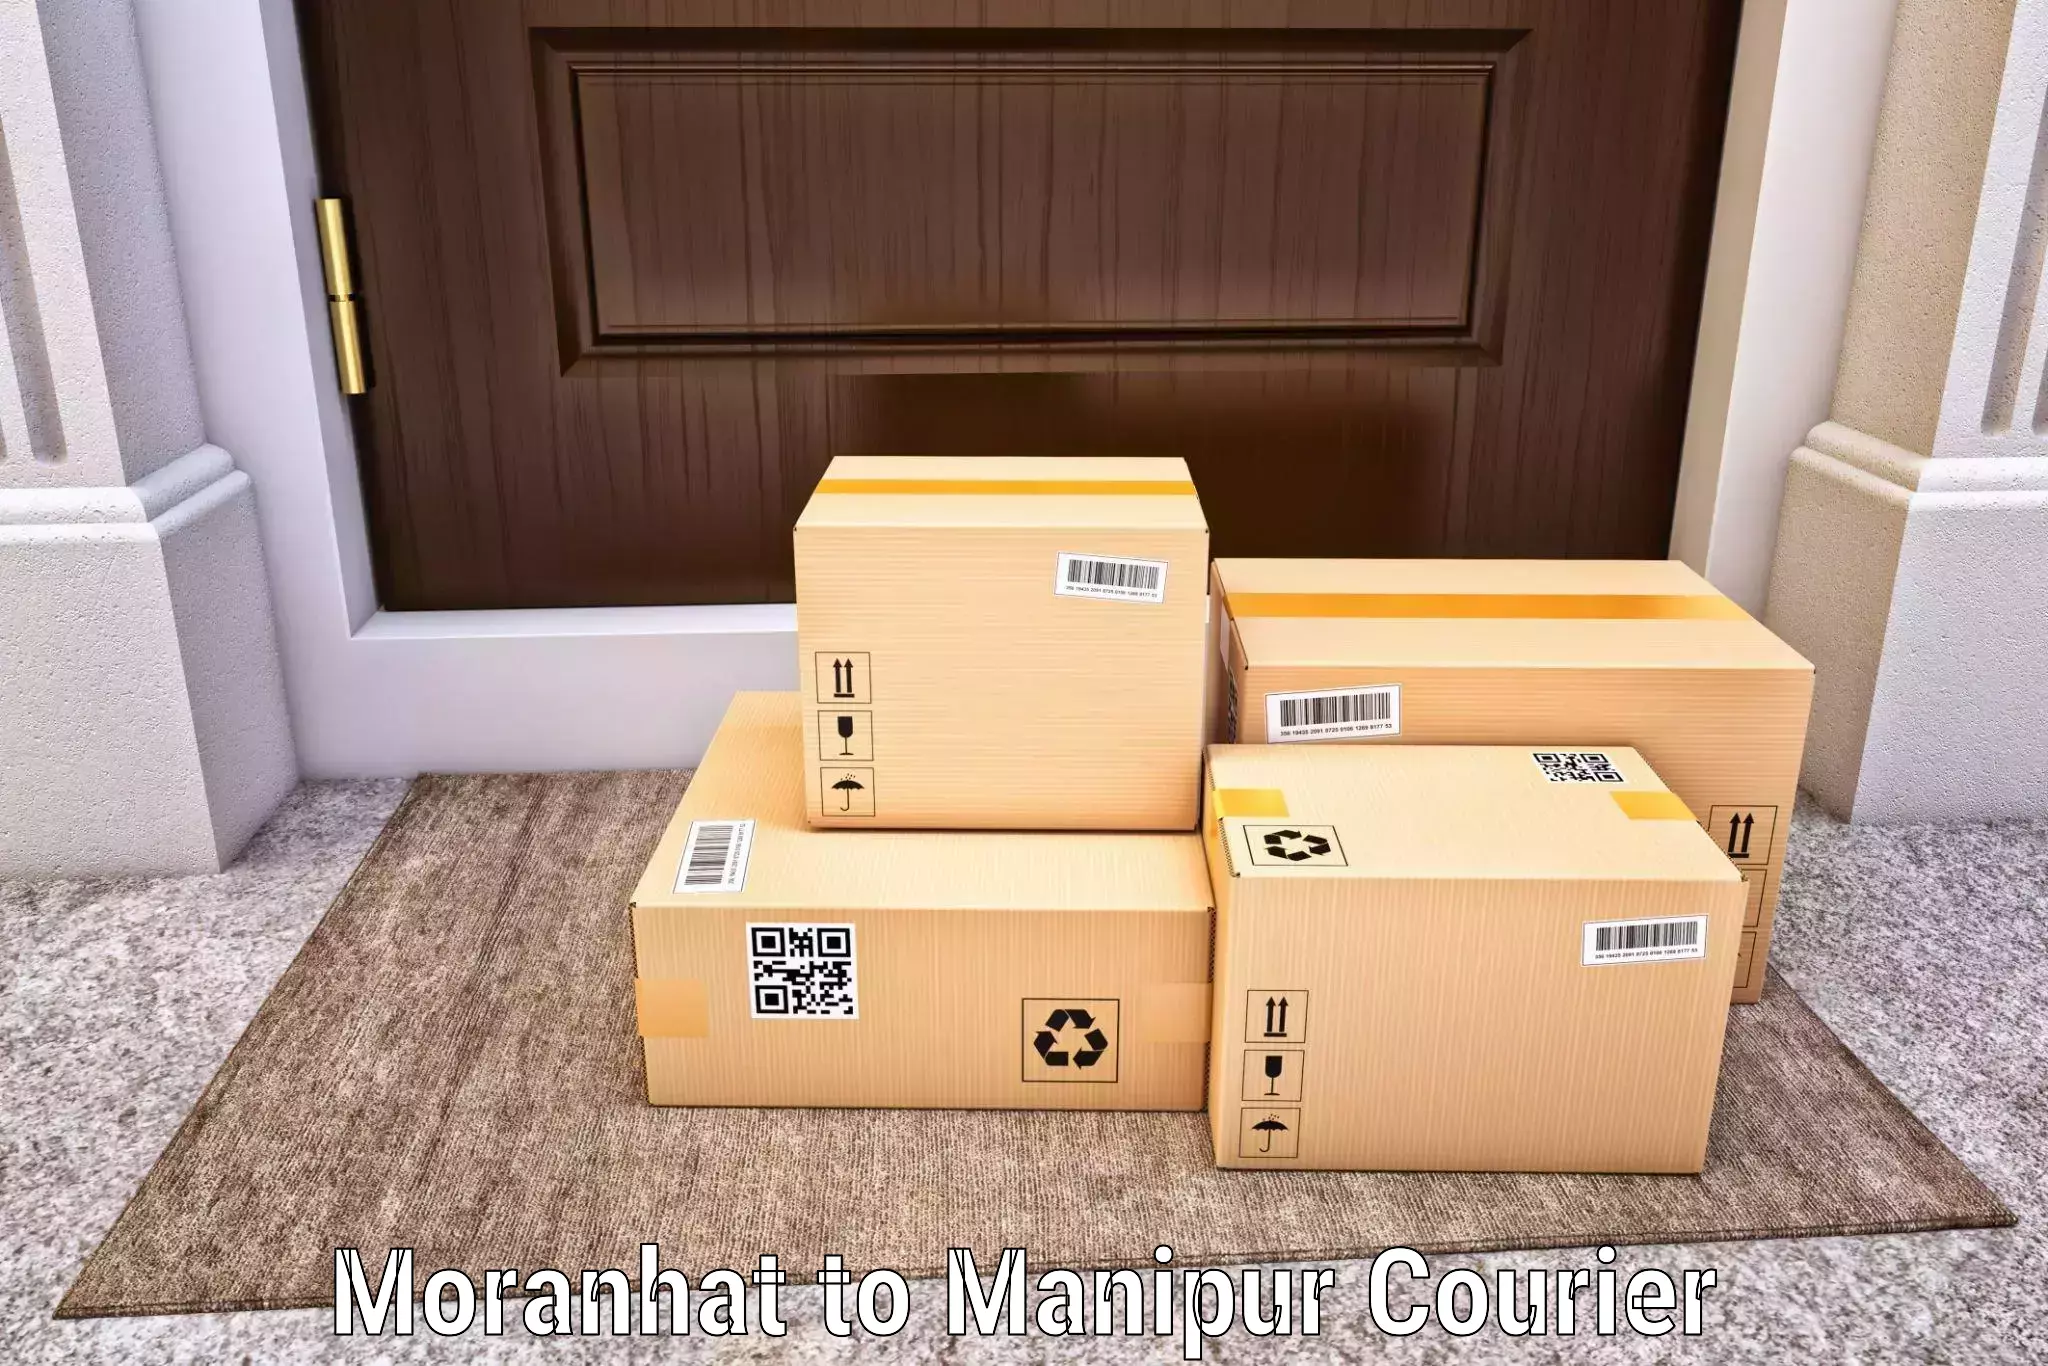 User-friendly courier app Moranhat to Moirang